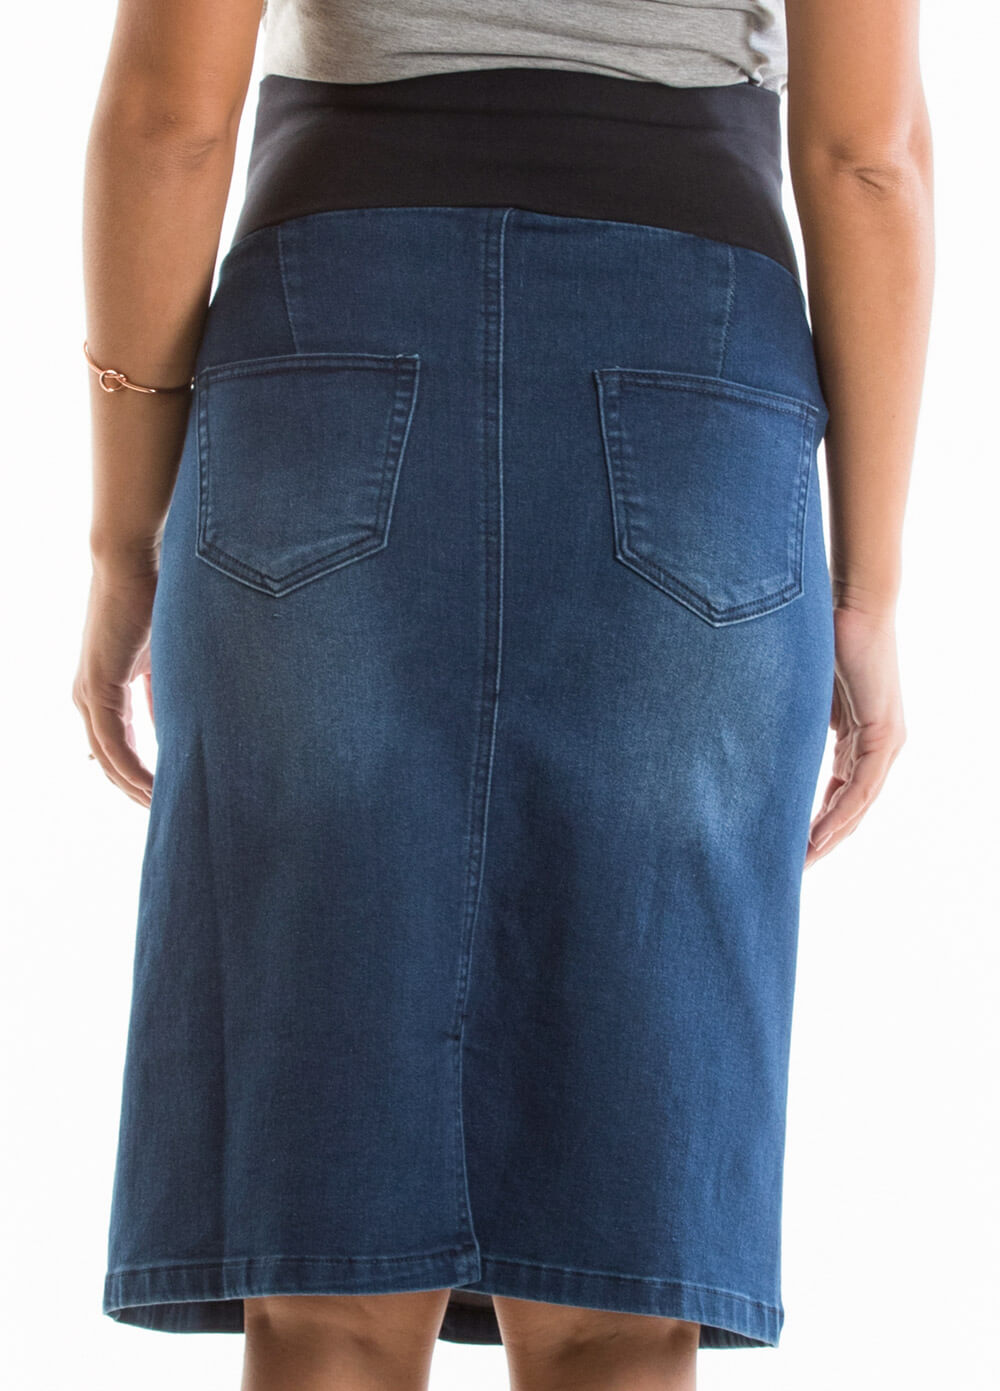 Maternity Denim Skirt in Blue Wash by Queen Bee 